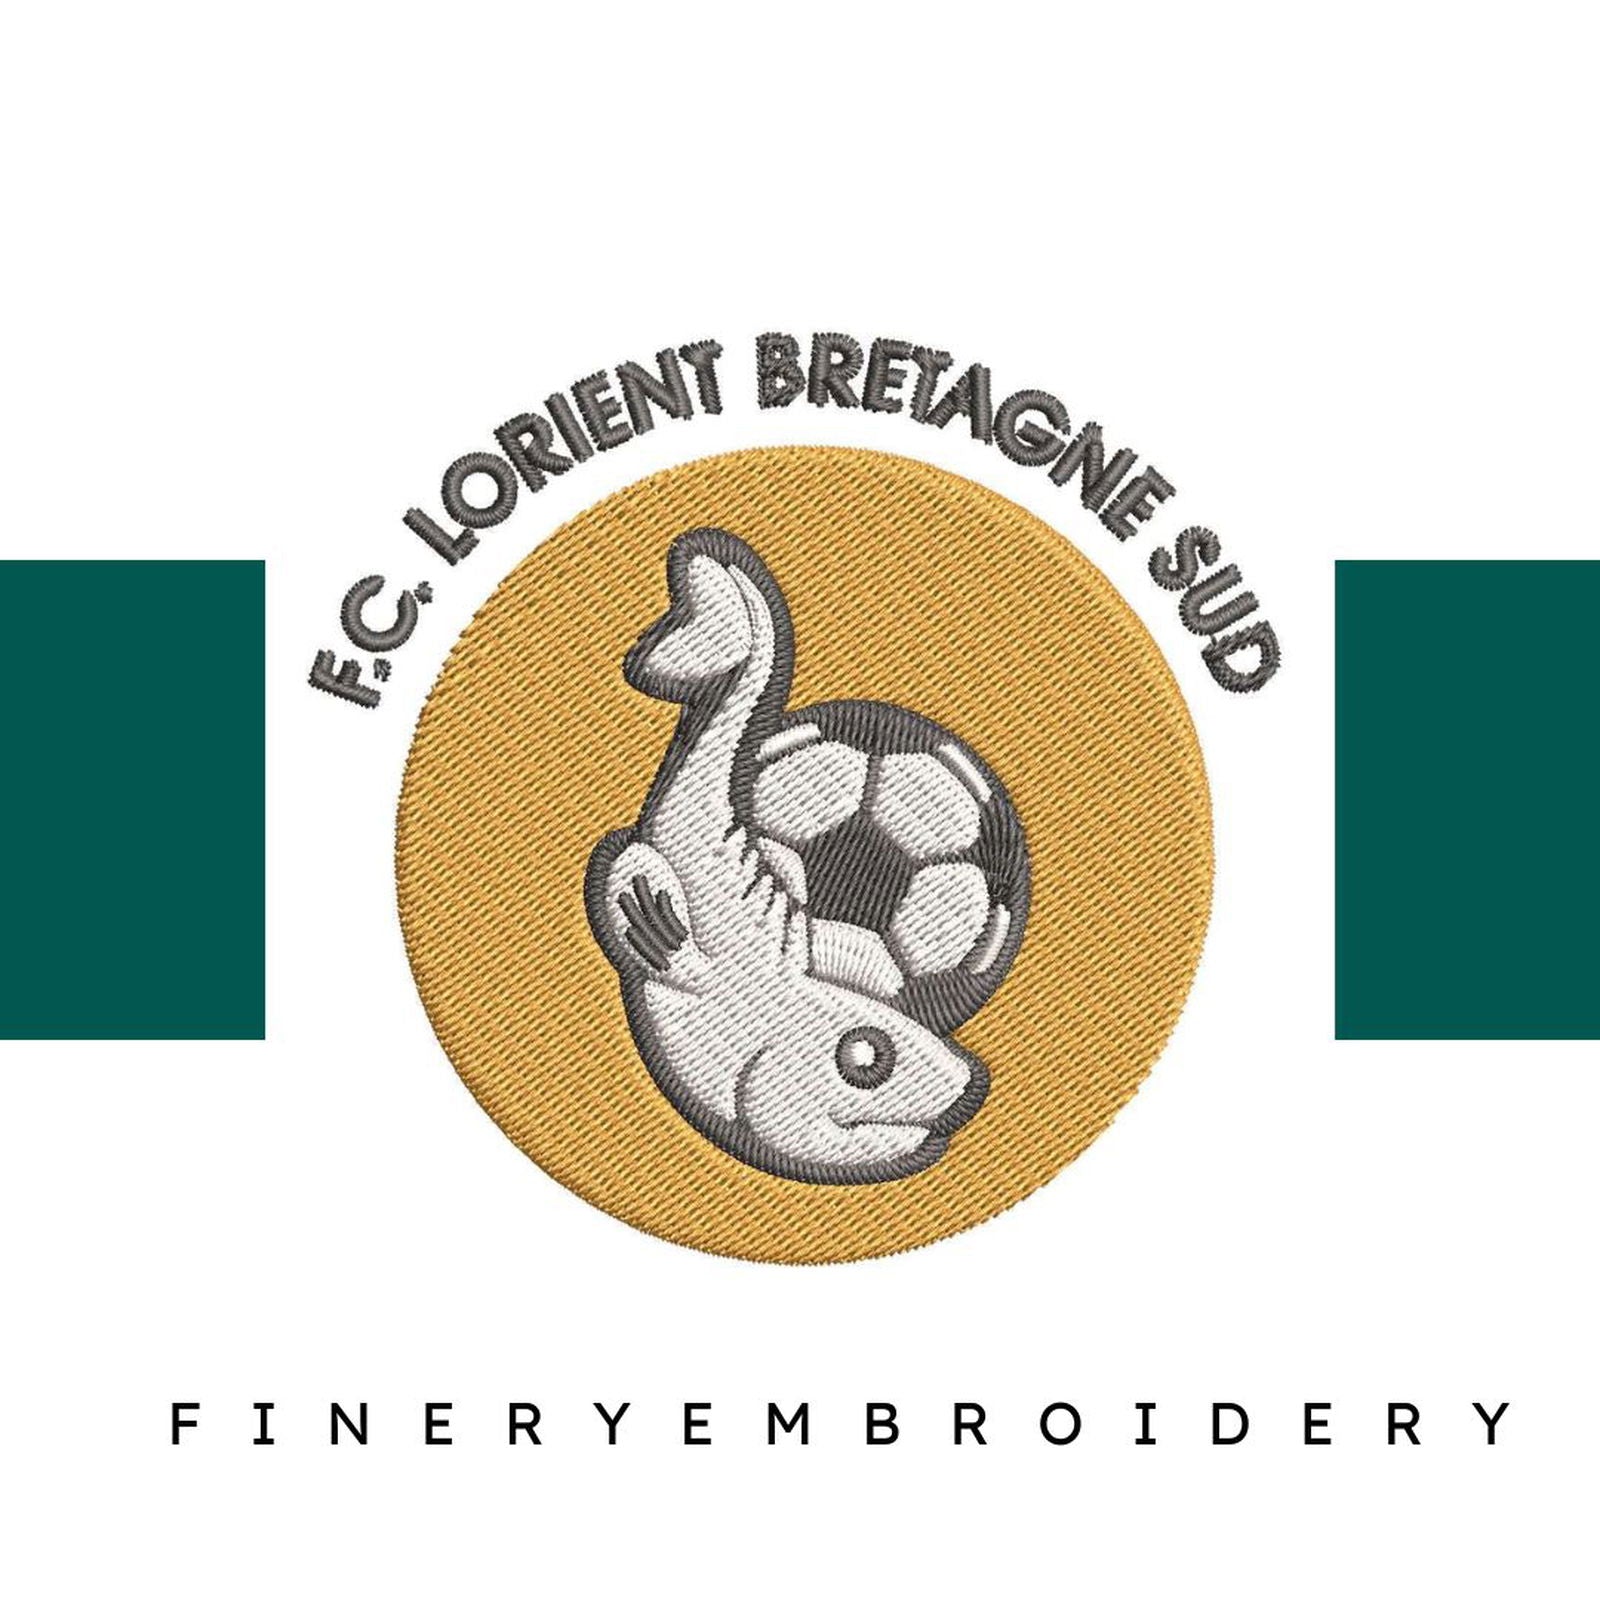 Lorient Football Team: Embroidery Design - FineryEmbroidery